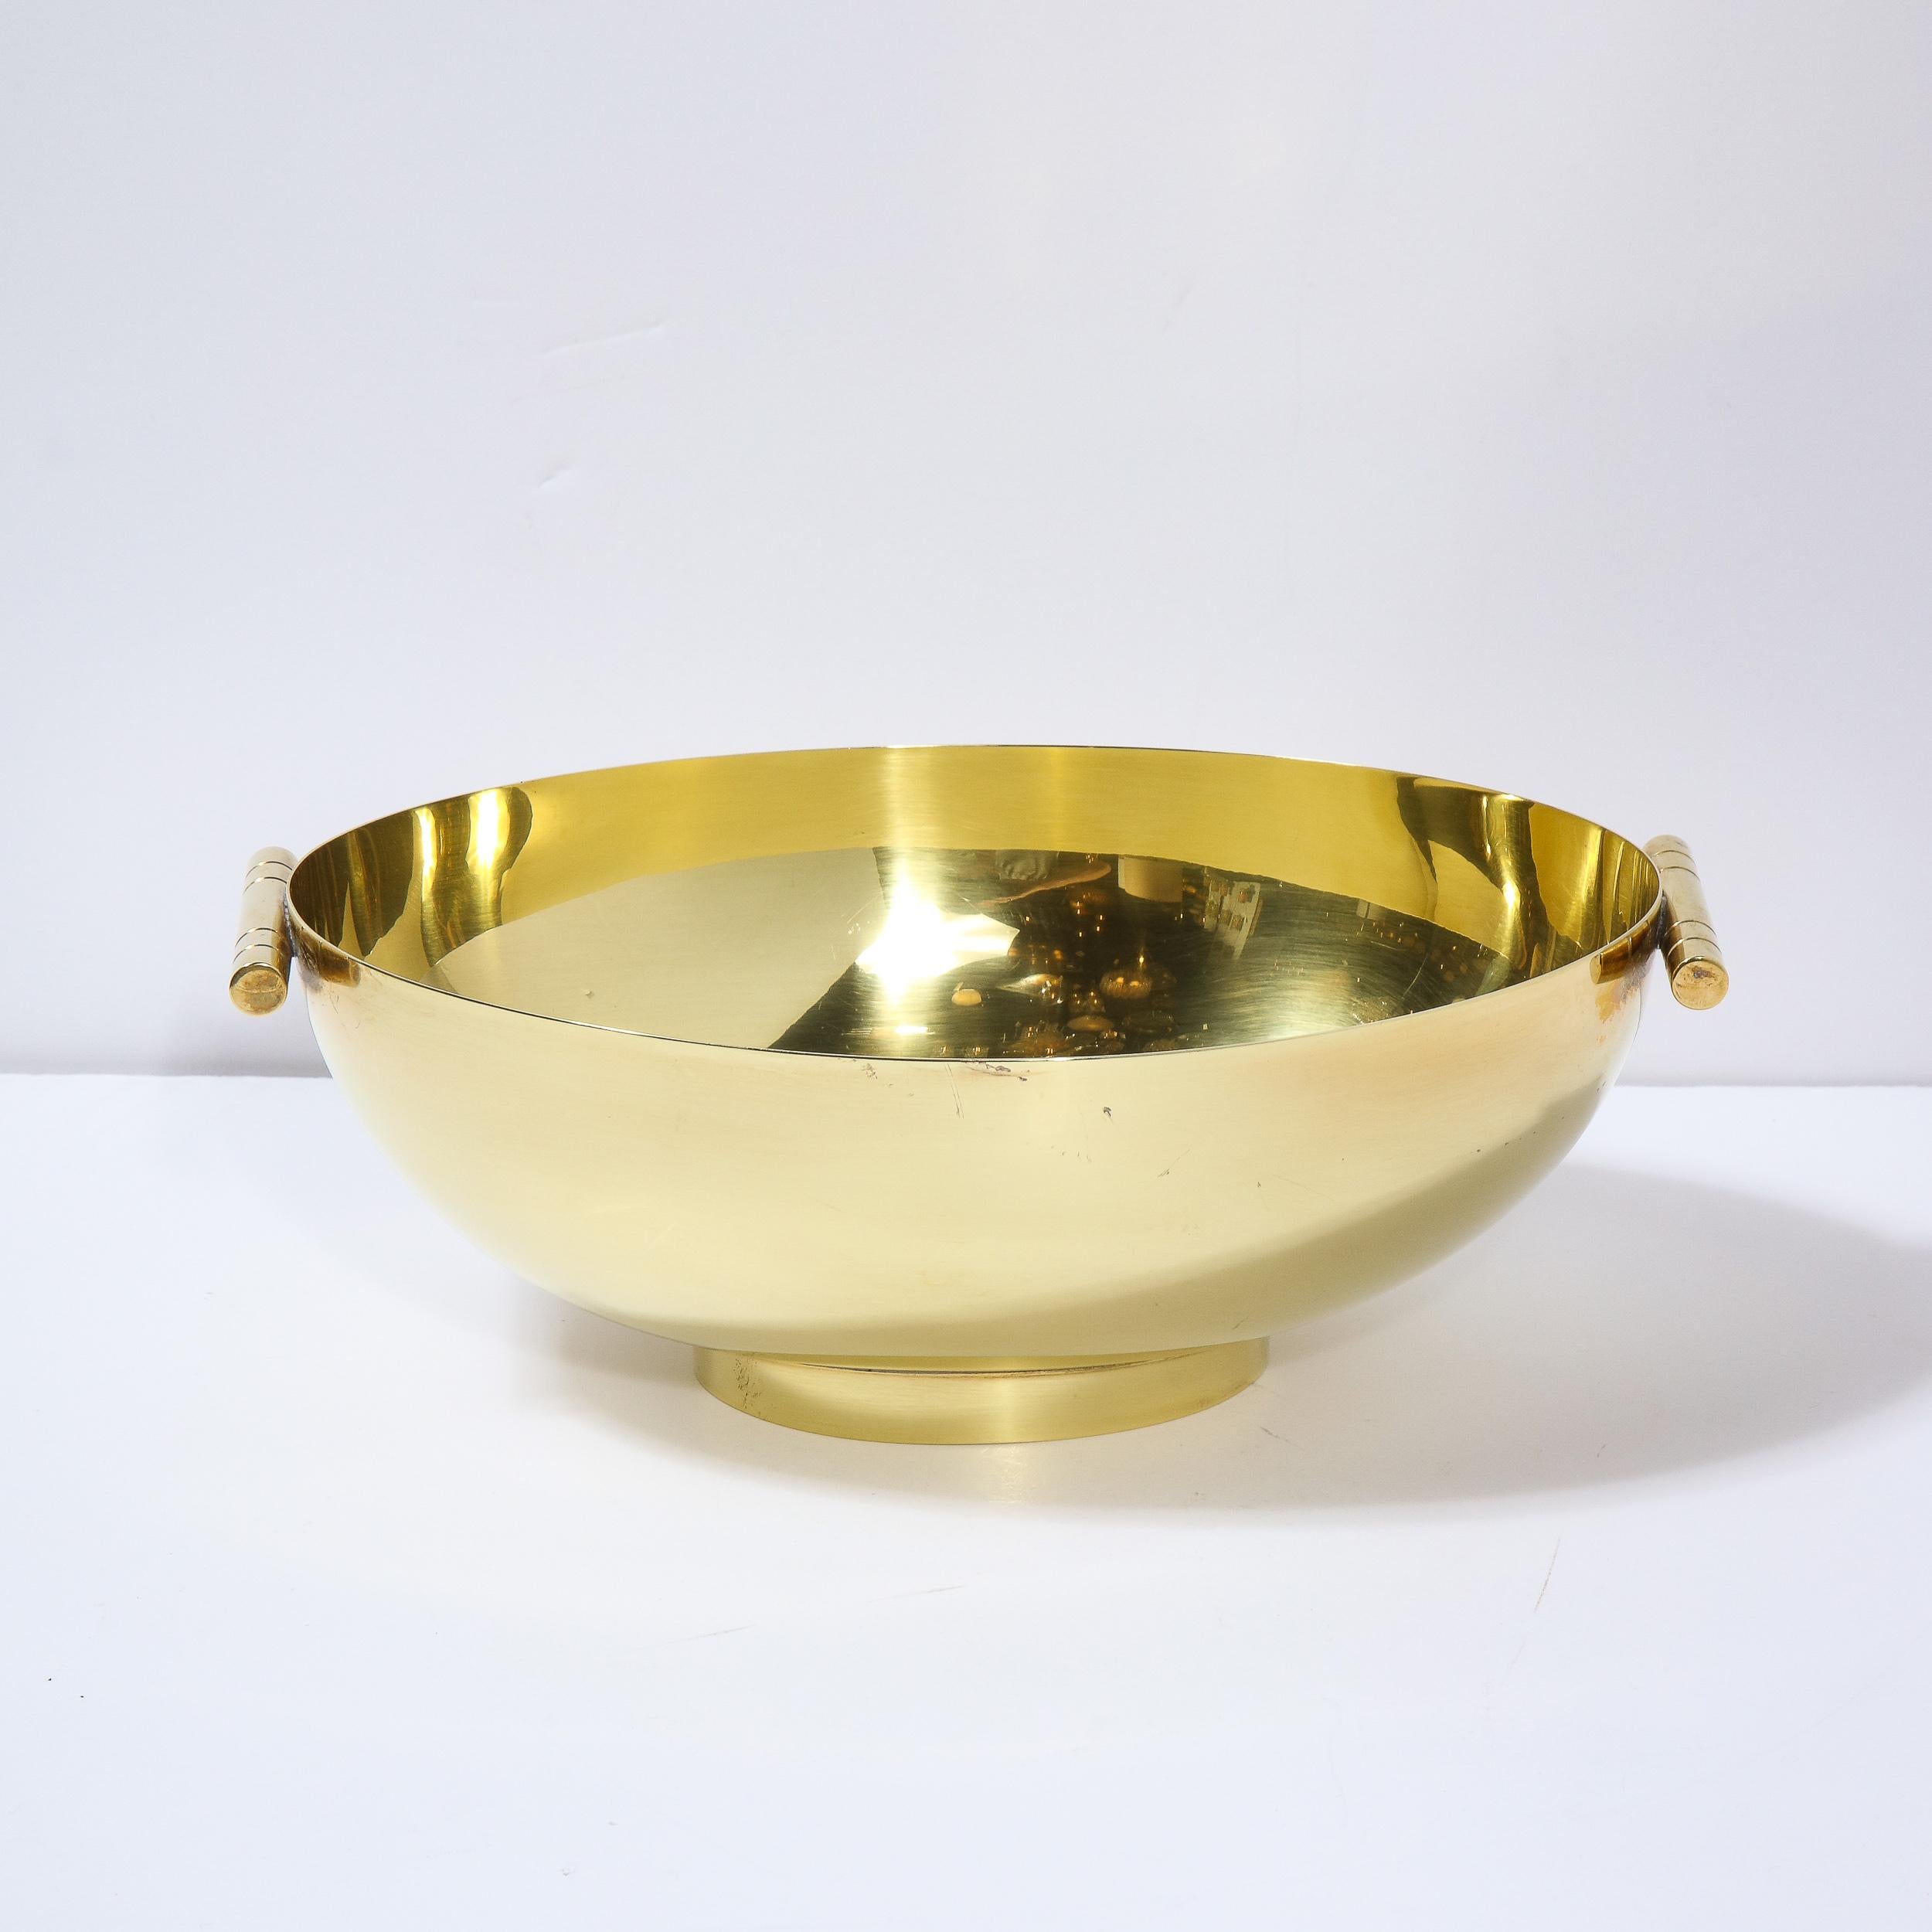 This elegant Mid-Century Modern polished brass bowl was designed by Tommi Parzinger for Dorlyn Silversmiths in the United States circa 1960. It features a concave oval body with a cylindrical banded handle on each side in lustrous brass. With its